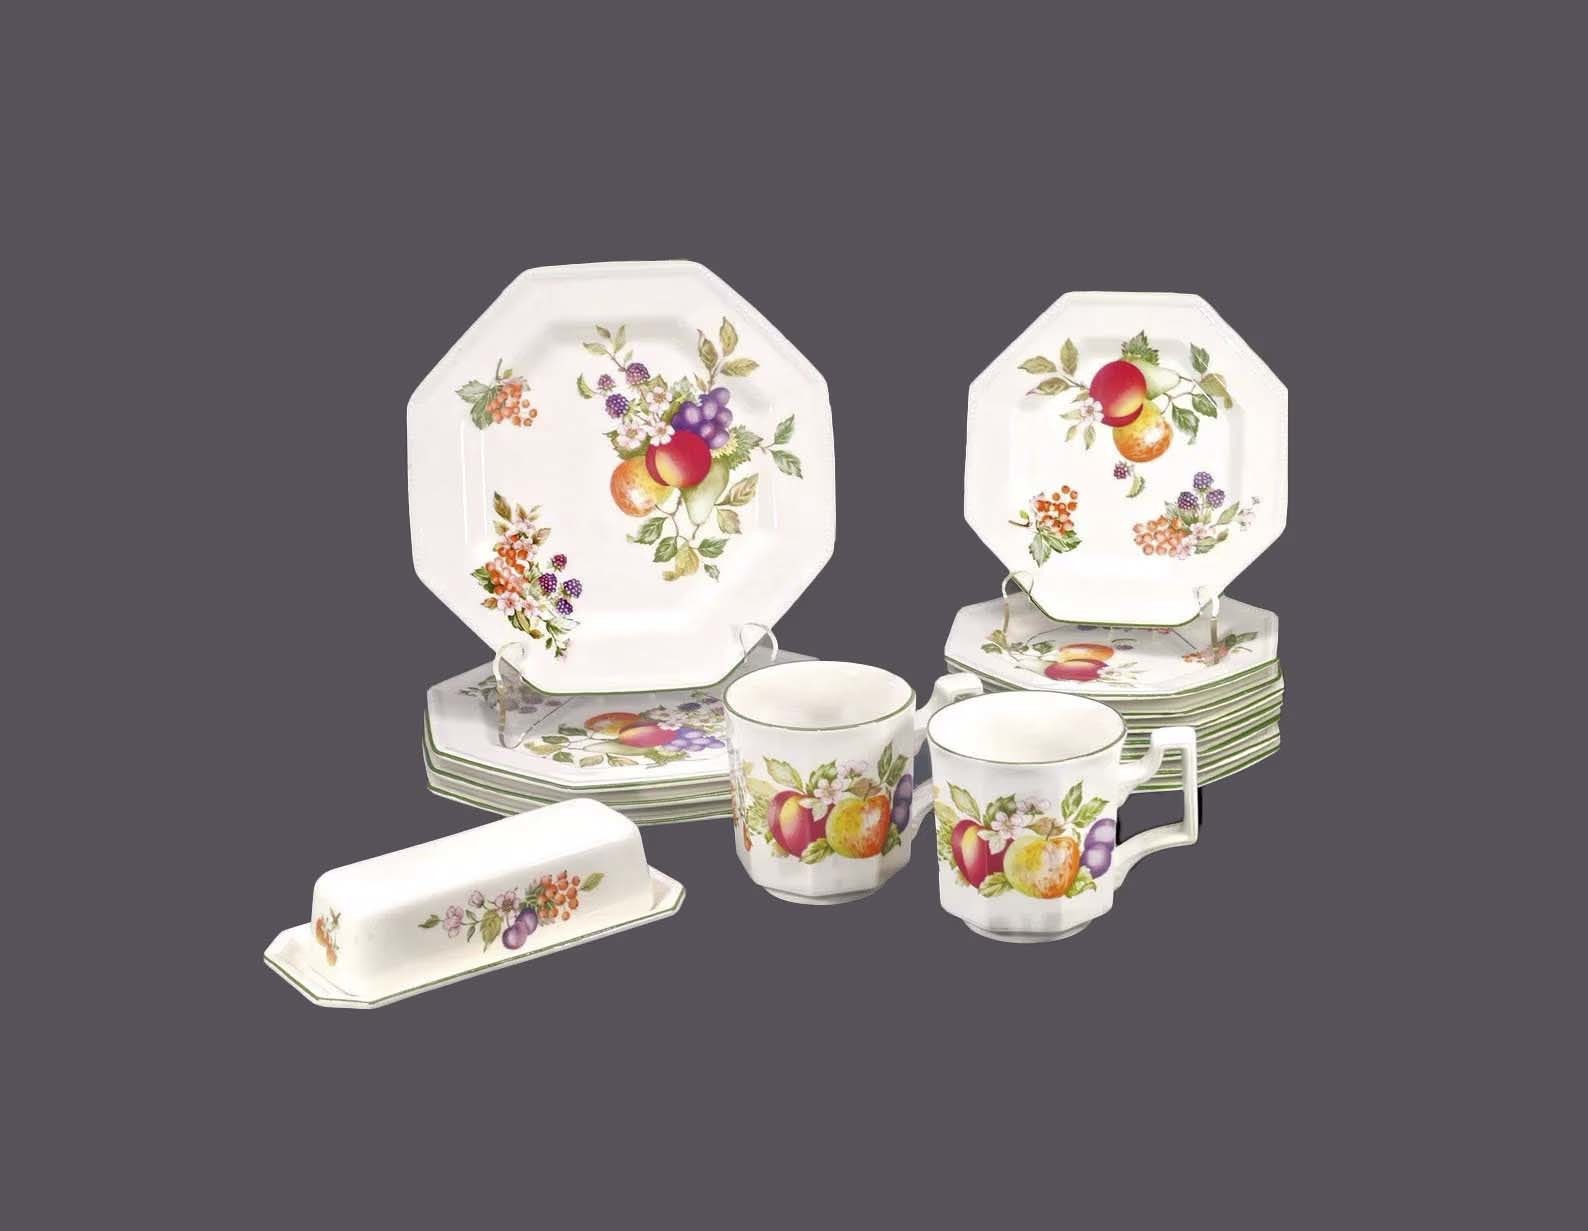 Johnson Brothers Fresh Fruit tableware made in England. Pieces sold separately. - $55.00 - $239.99